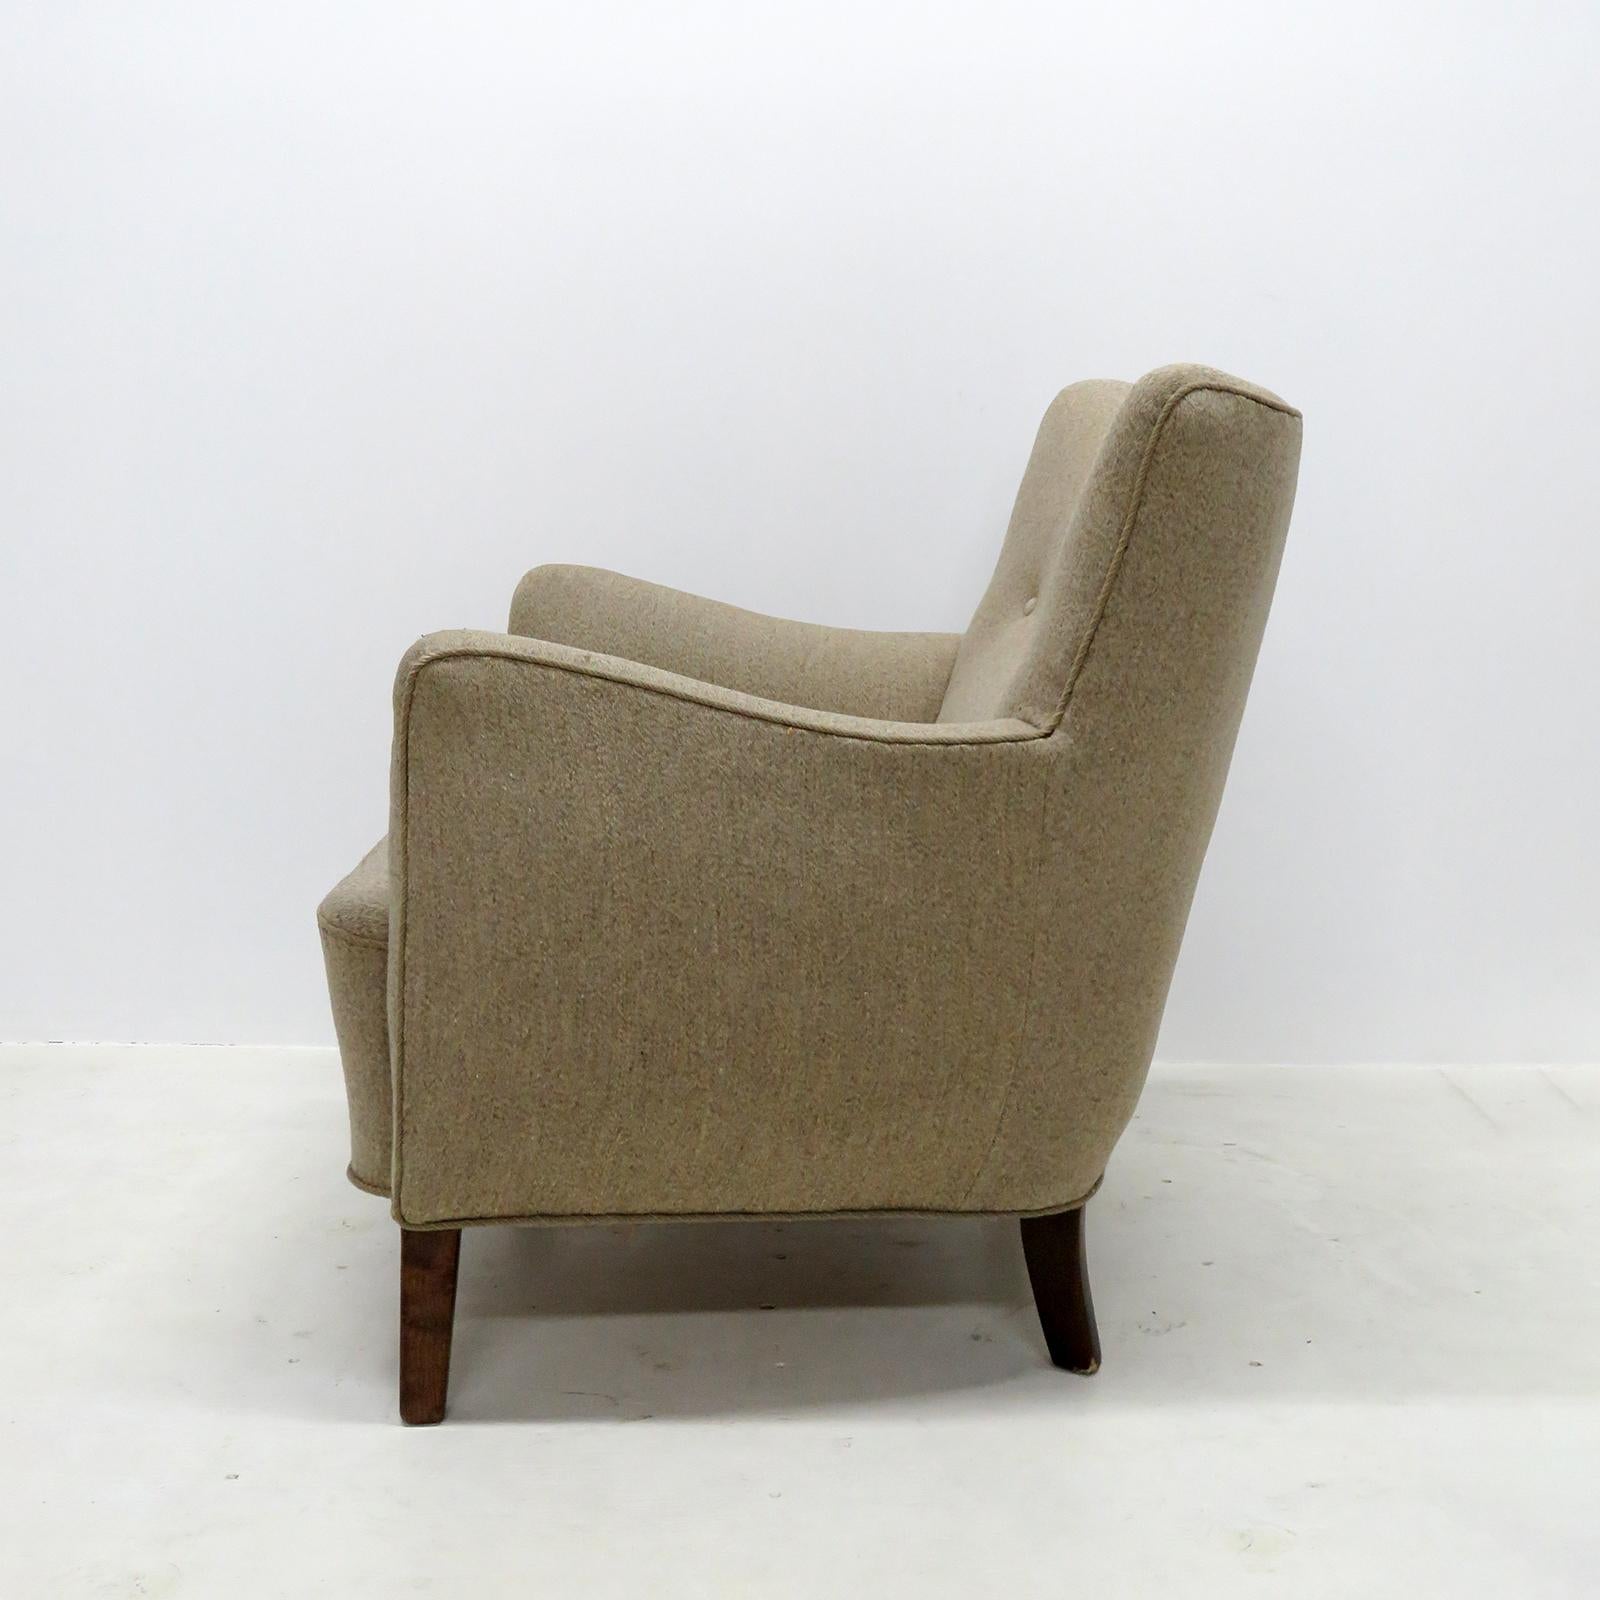 Stained Danish Modern Lounge Chair, 1940